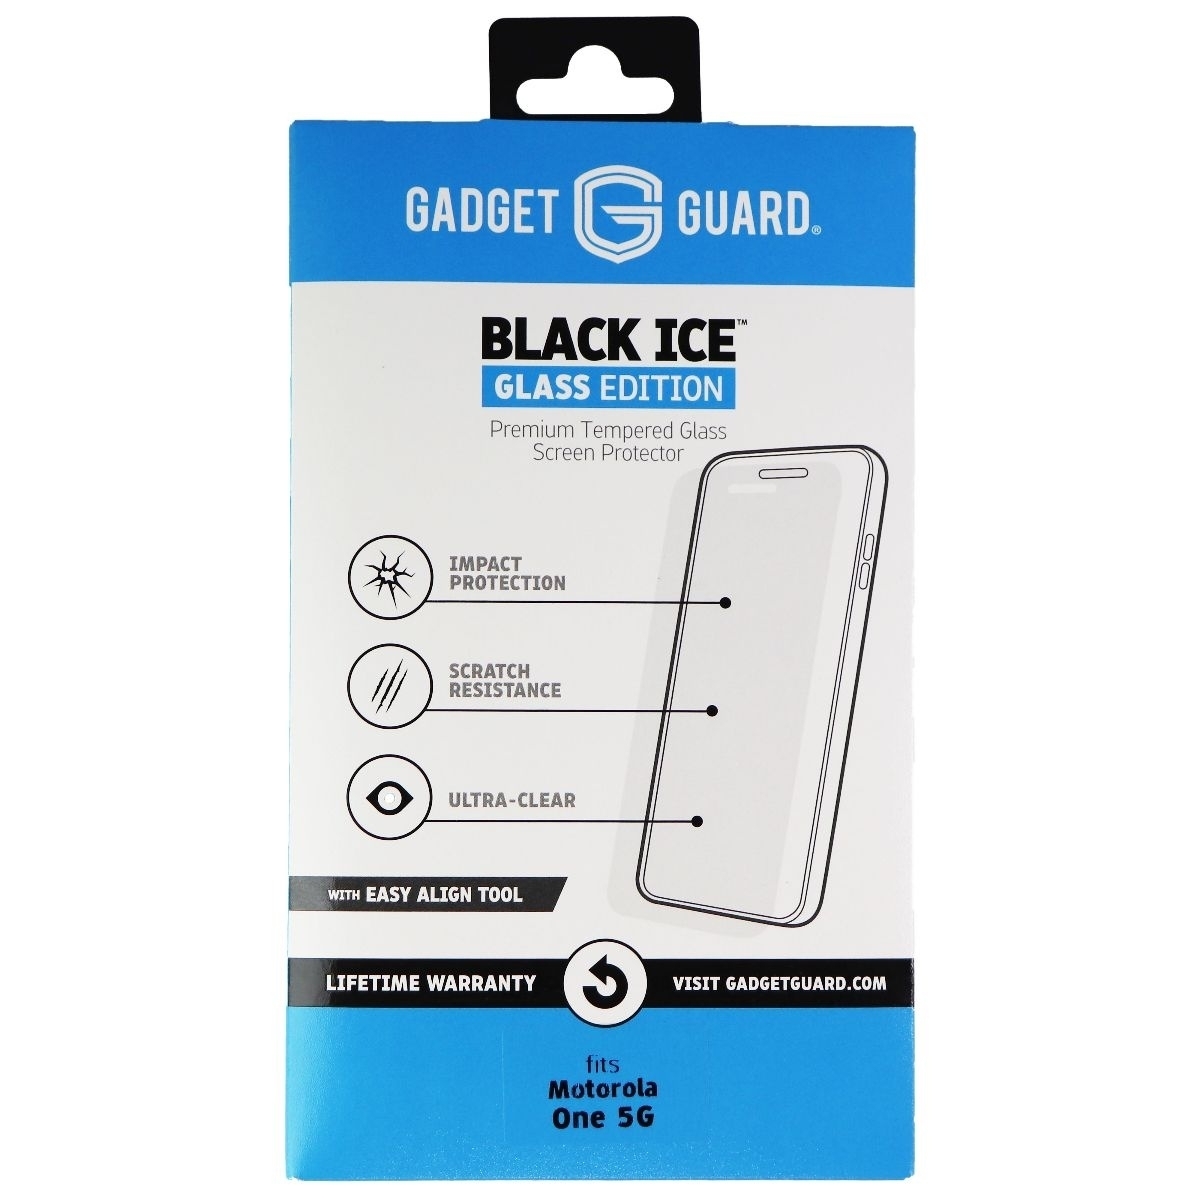 Gadget Guard Black Ice Glass Edition Protector For Motorola One 5G - Clear